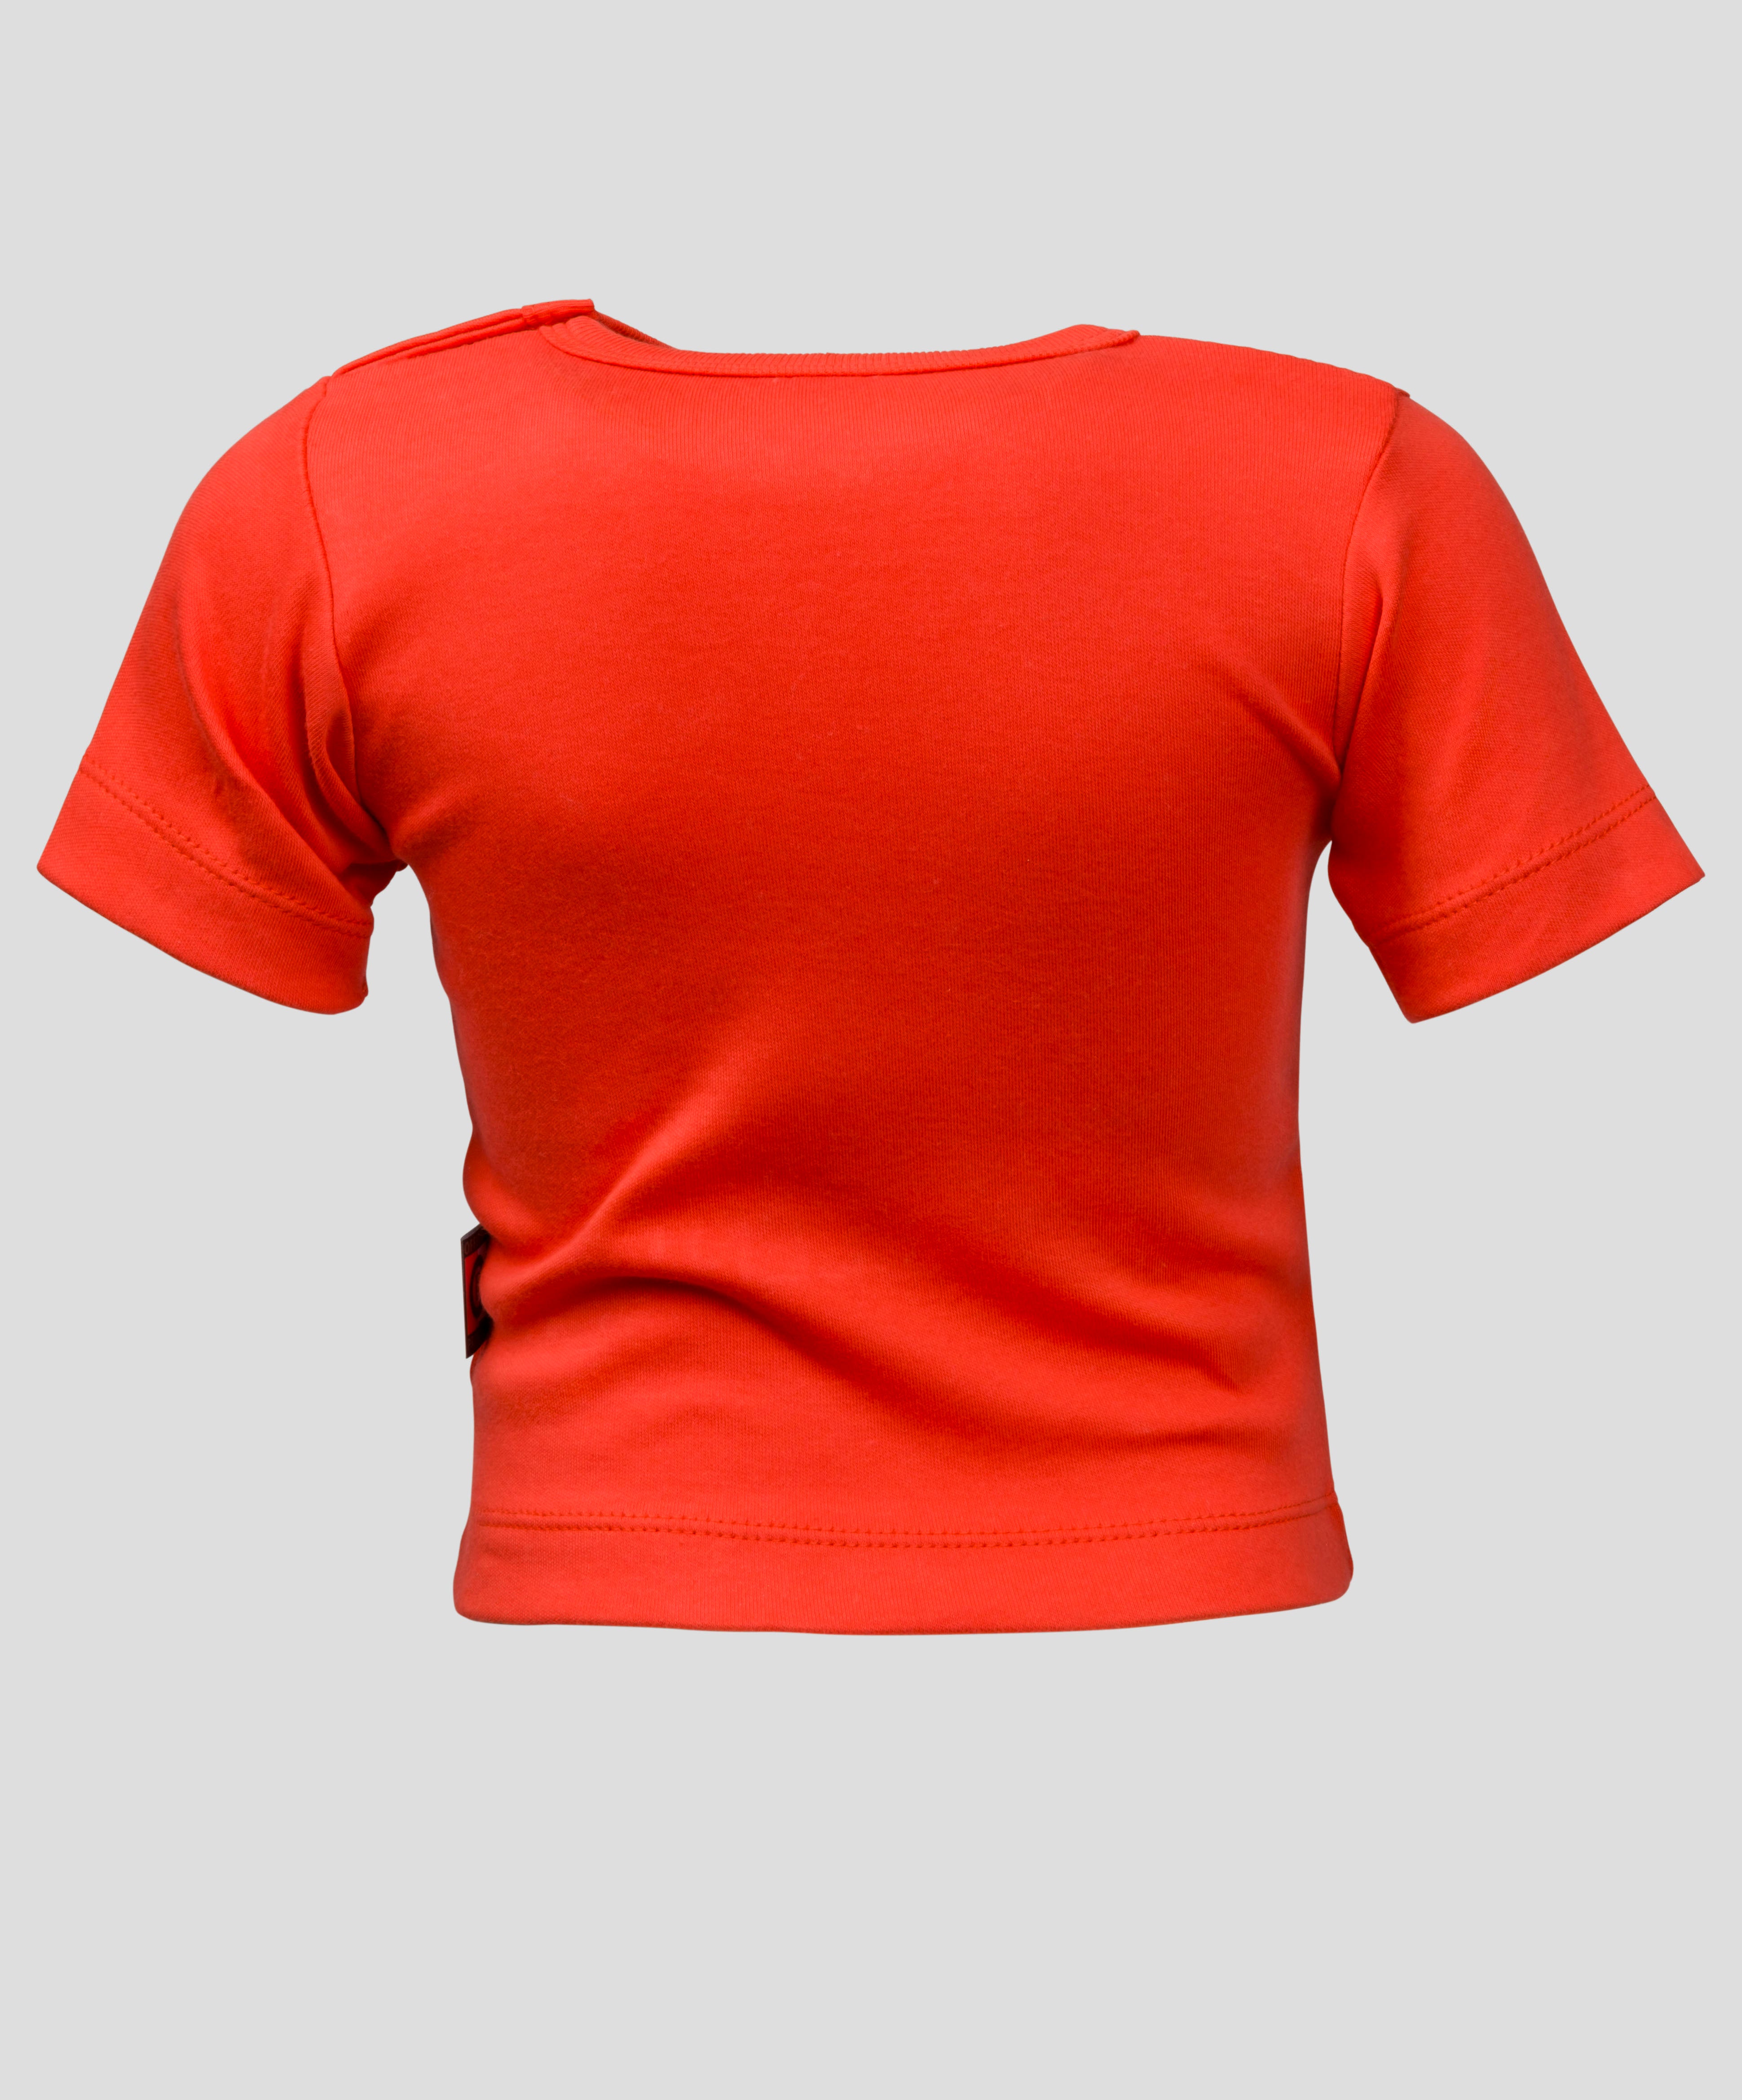 T-shirt Baby, Cound to 010, Red